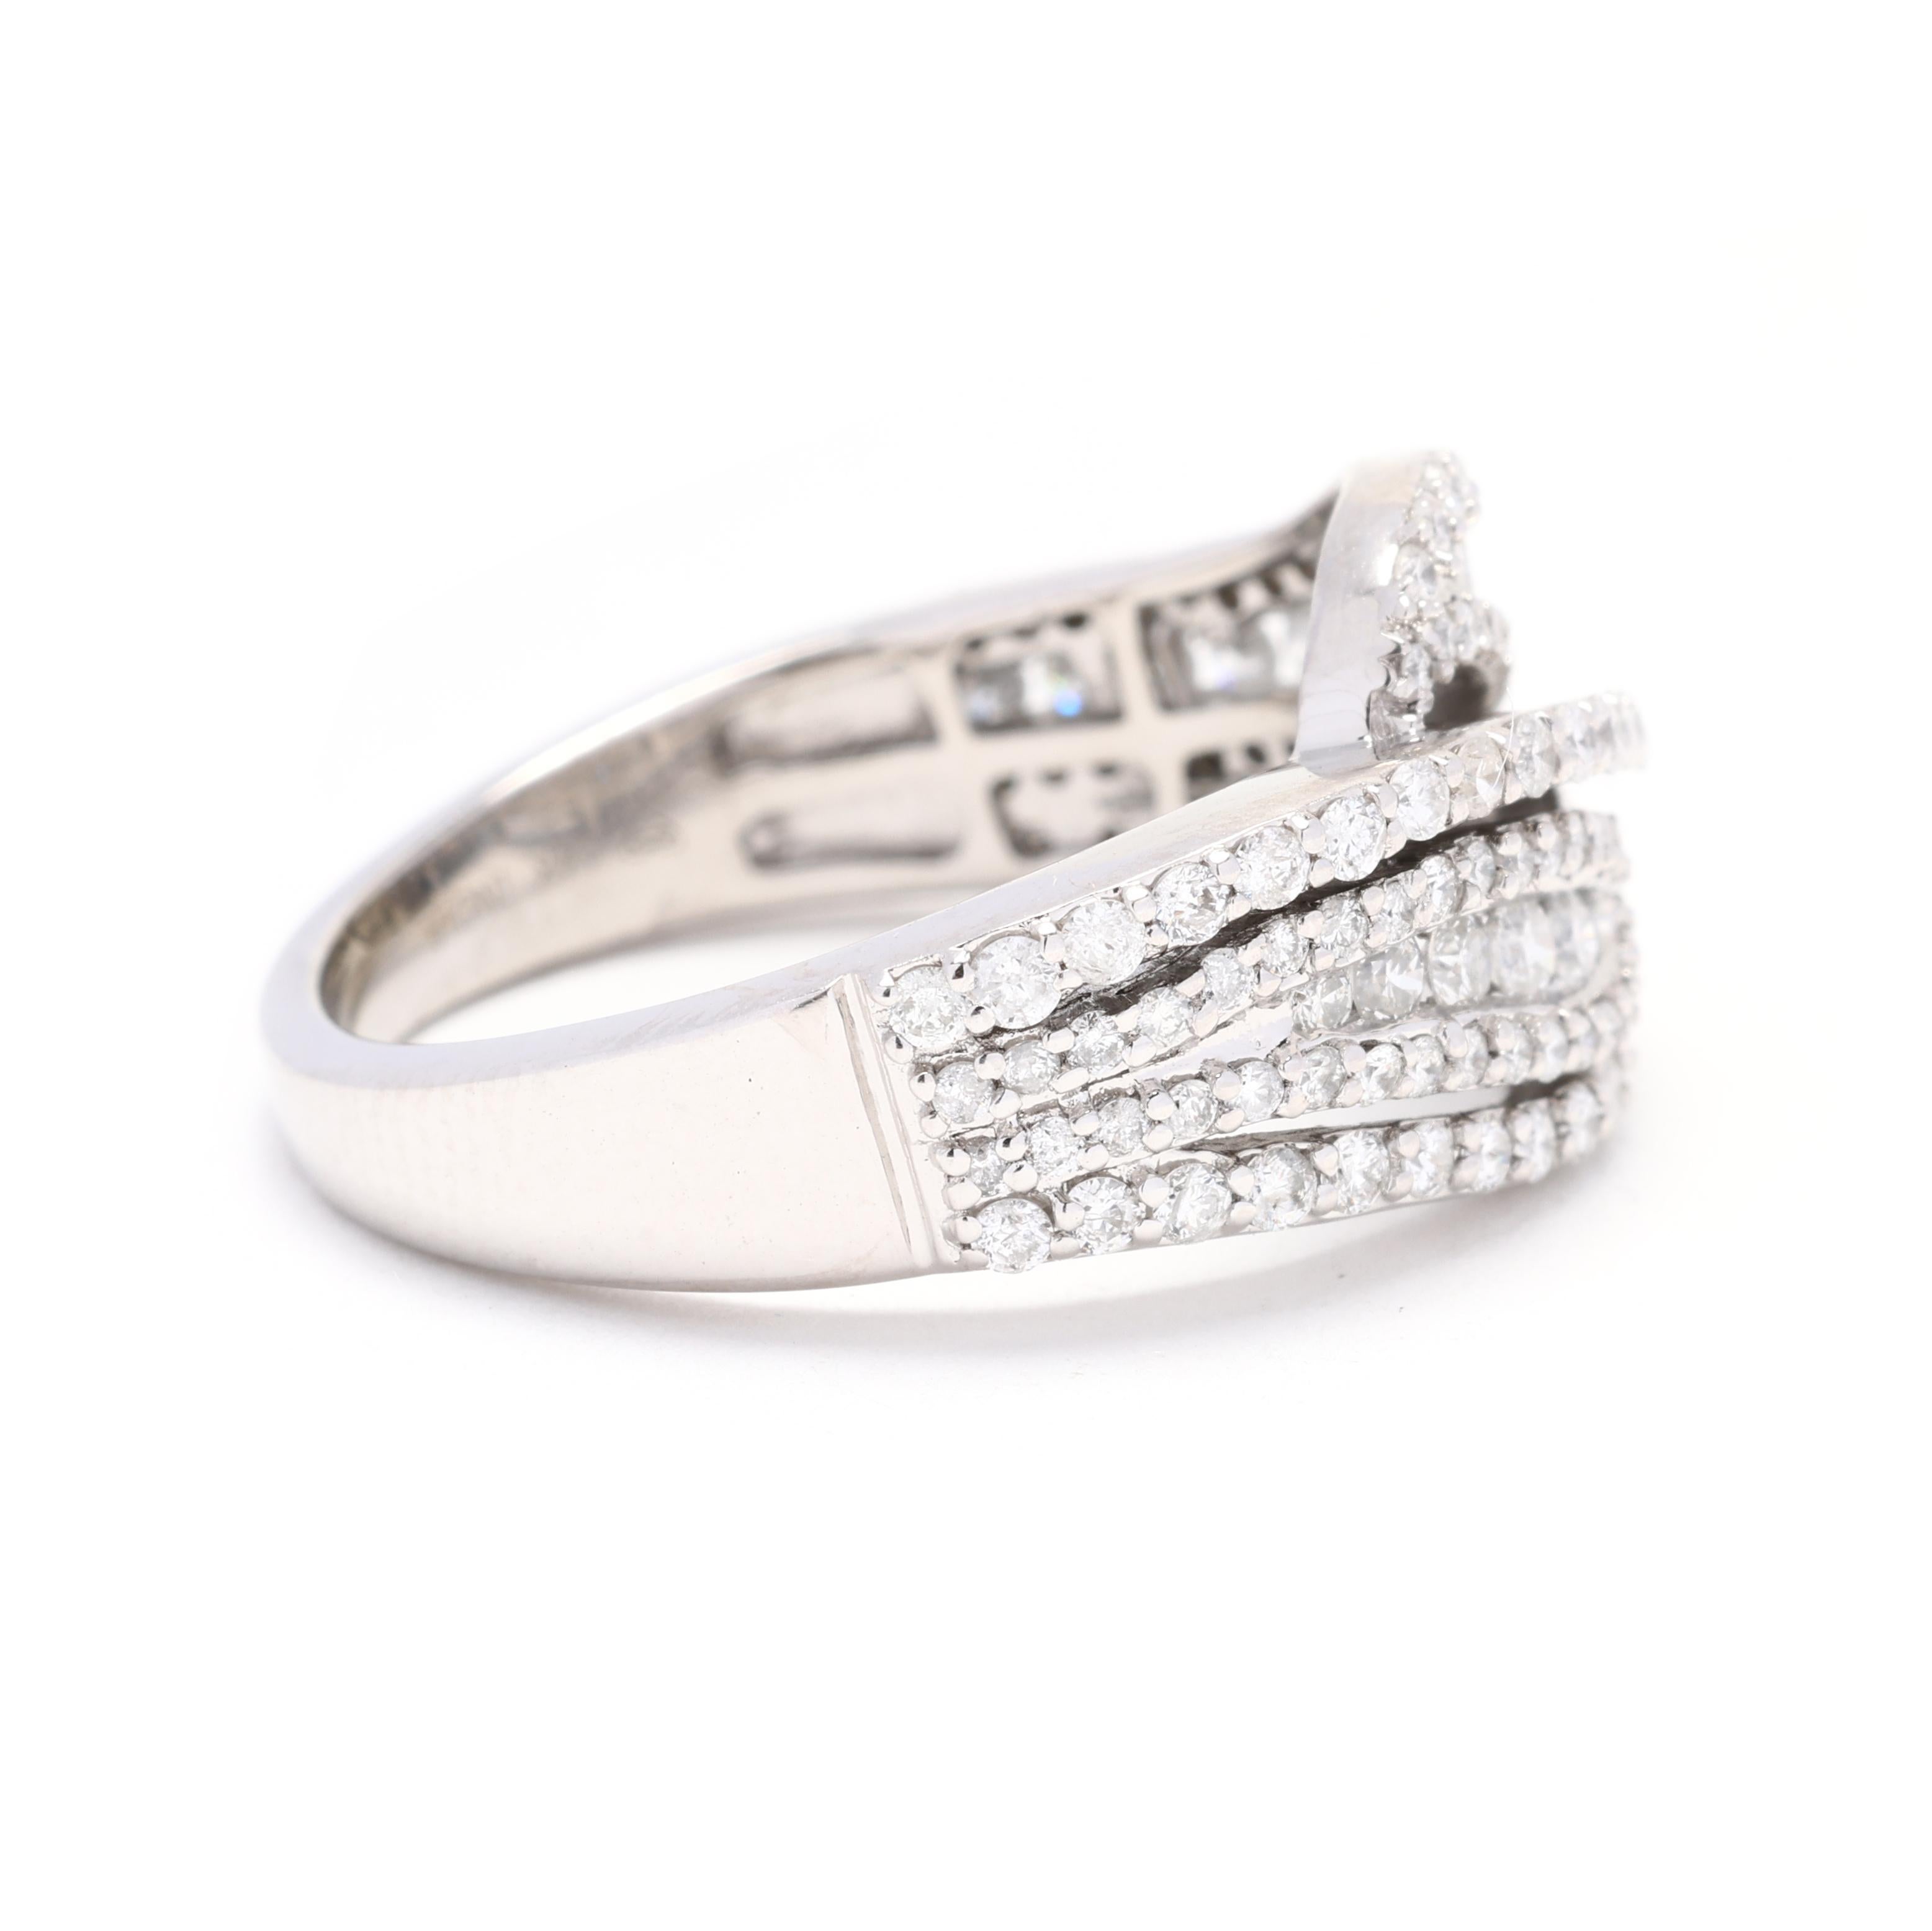 This stunning 0.90ctw diamond and 14k white gold twisted band ring is a true statement piece. The intricate design of the twisted band adds a unique and eye-catching element to this elegant ring. Crafted from high-quality 14k white gold, this ring